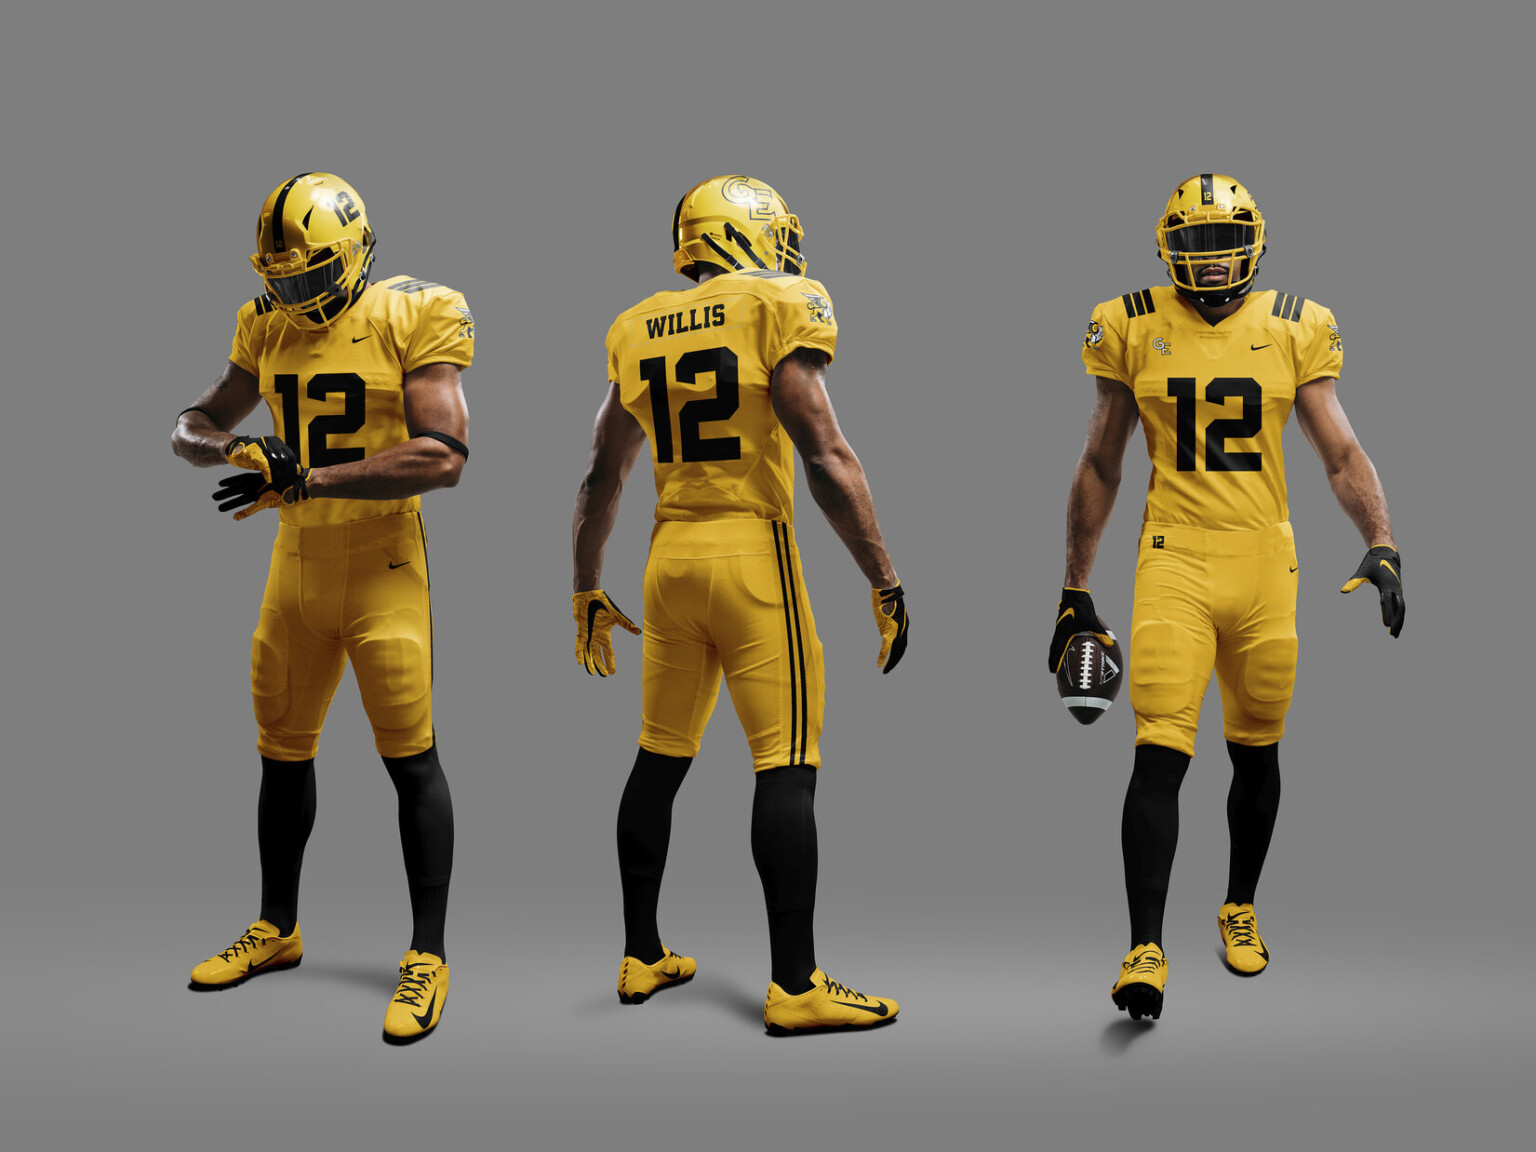 3 view points of yellow football uniform with black accents